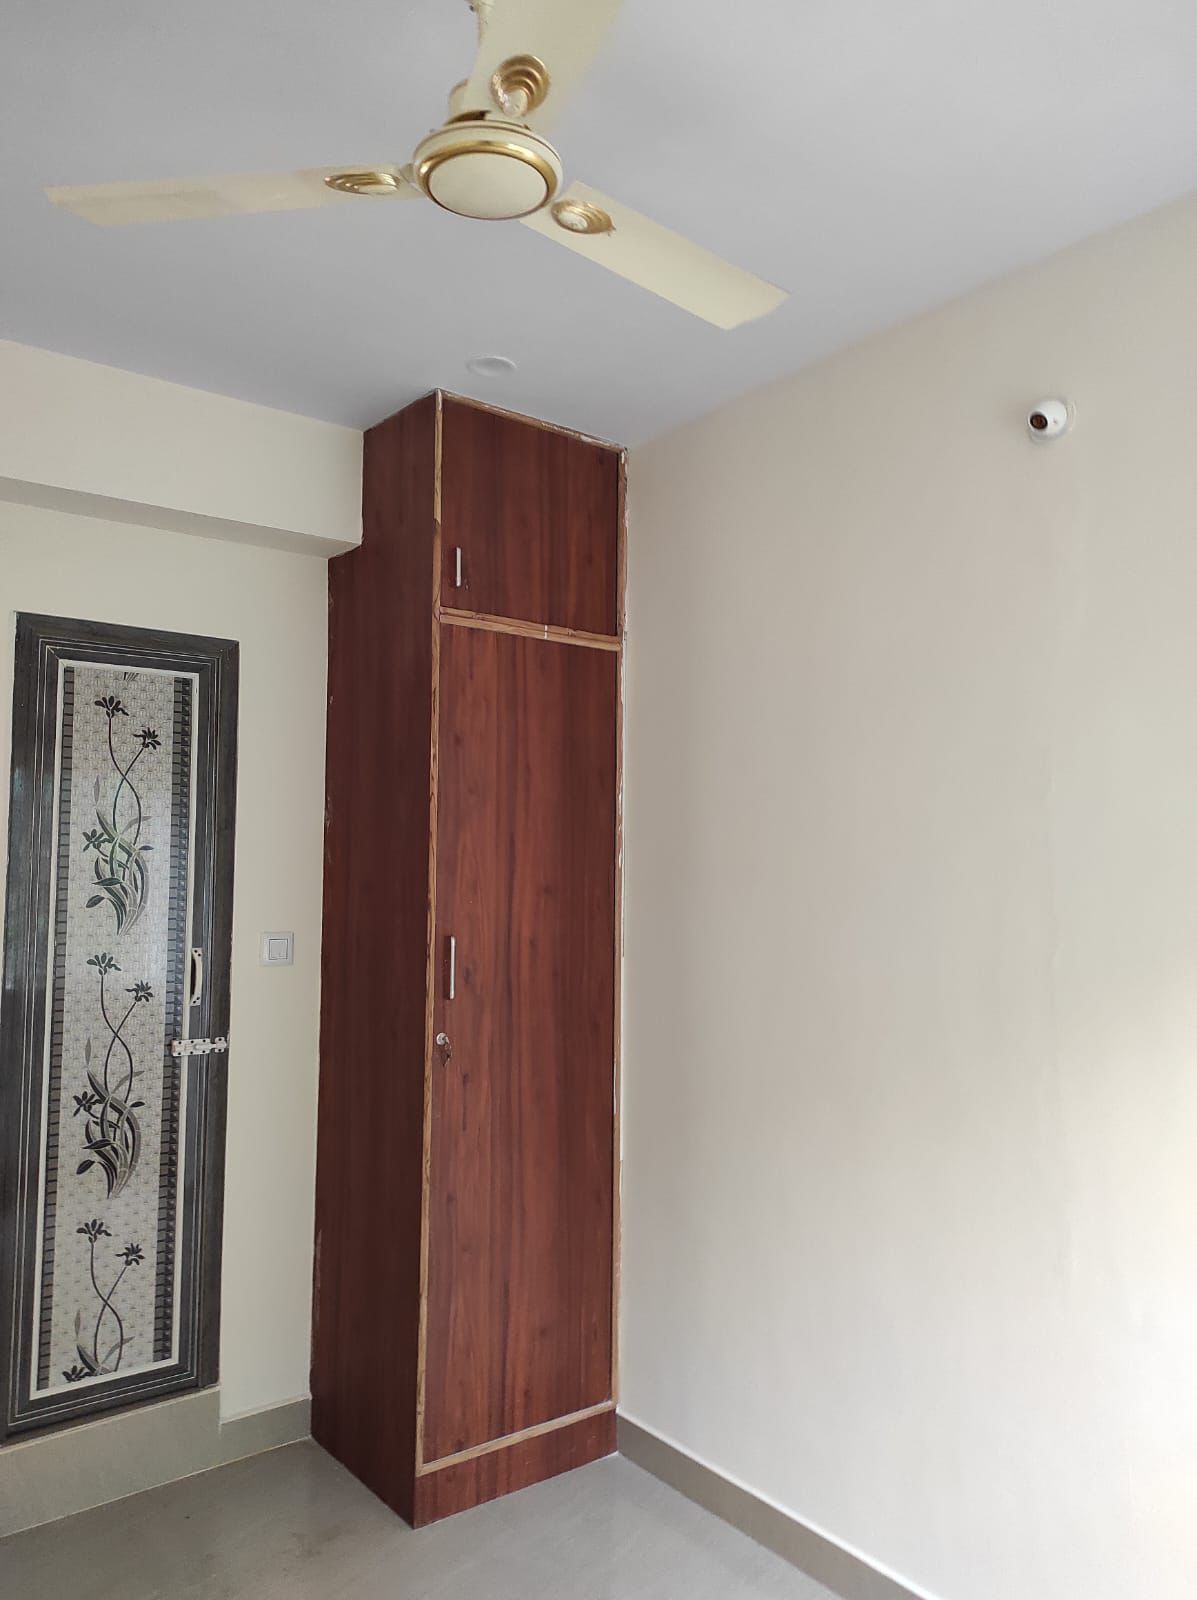 1 BHK Residential Apartment for Lease Only at JAML2 - 1978 in Jakkur